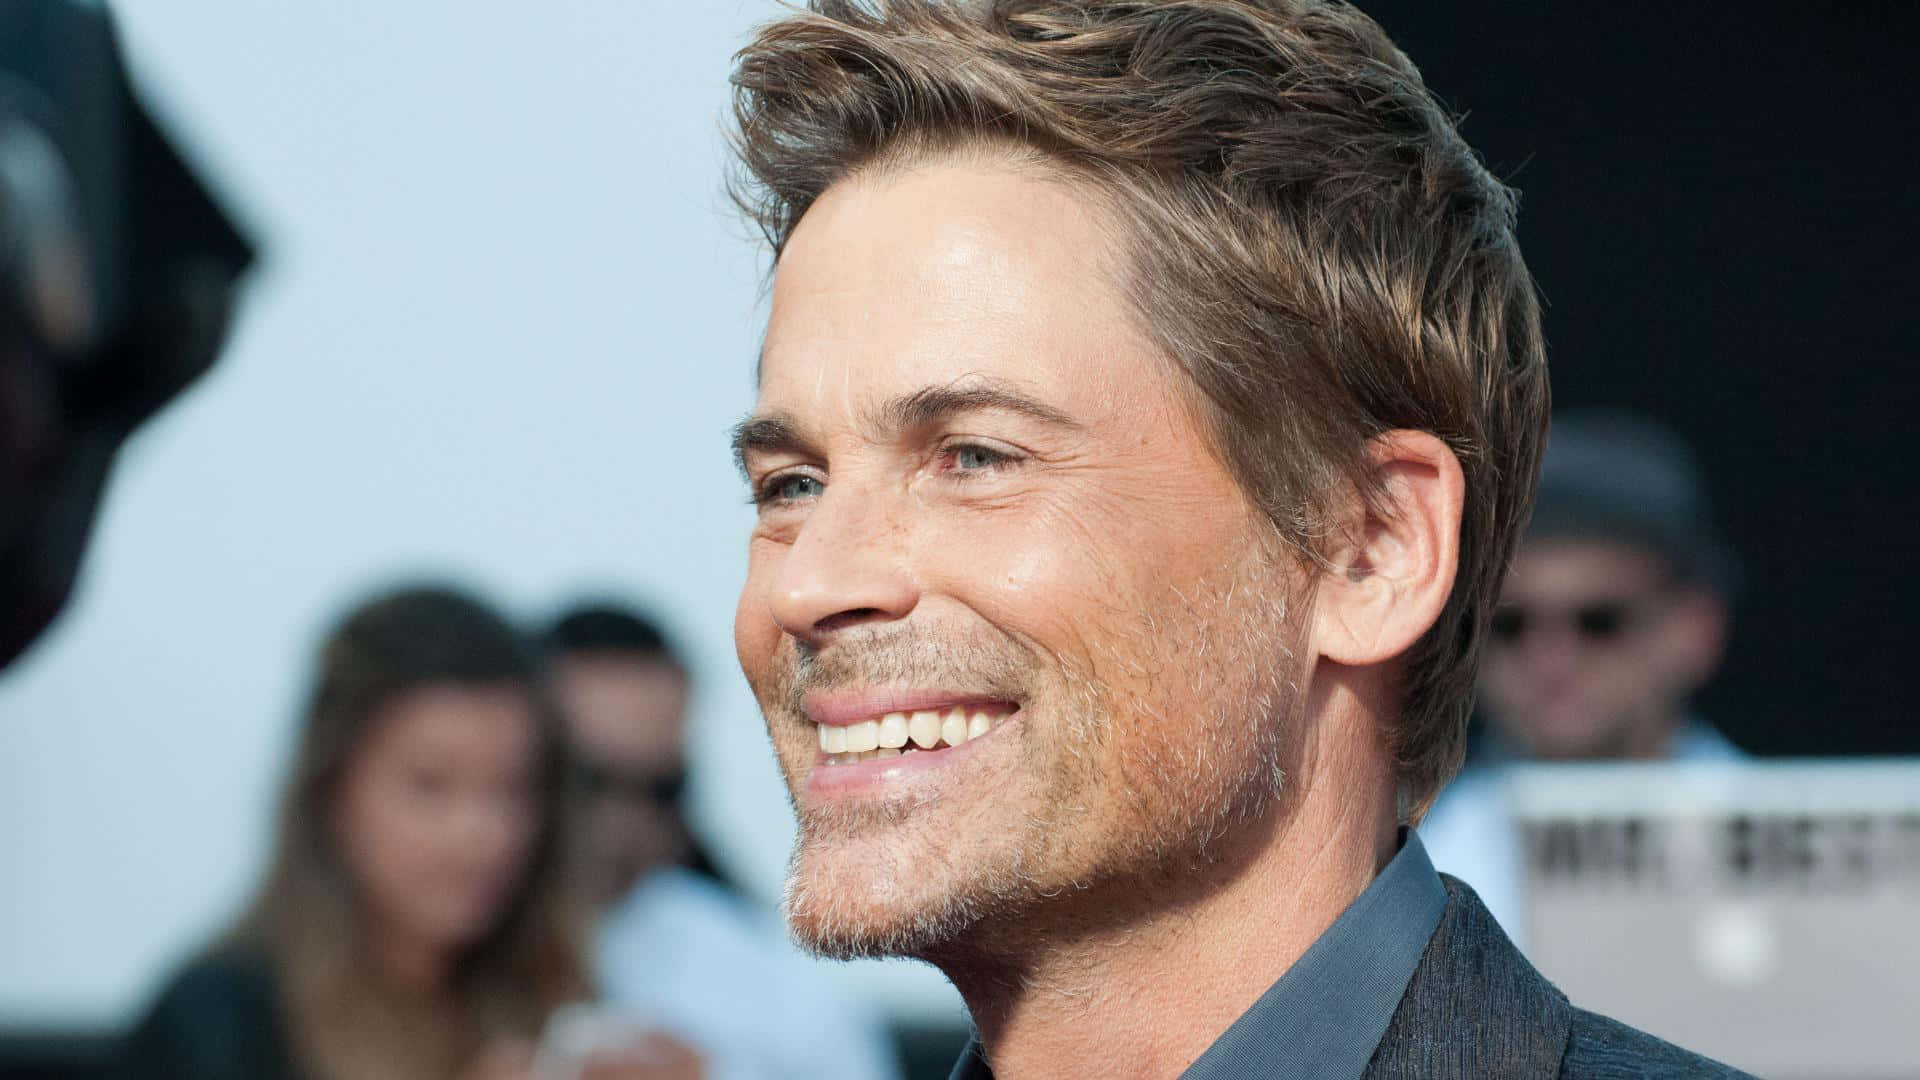 Rob Lowe Looking Dashing In A Crisp White Shirt Background